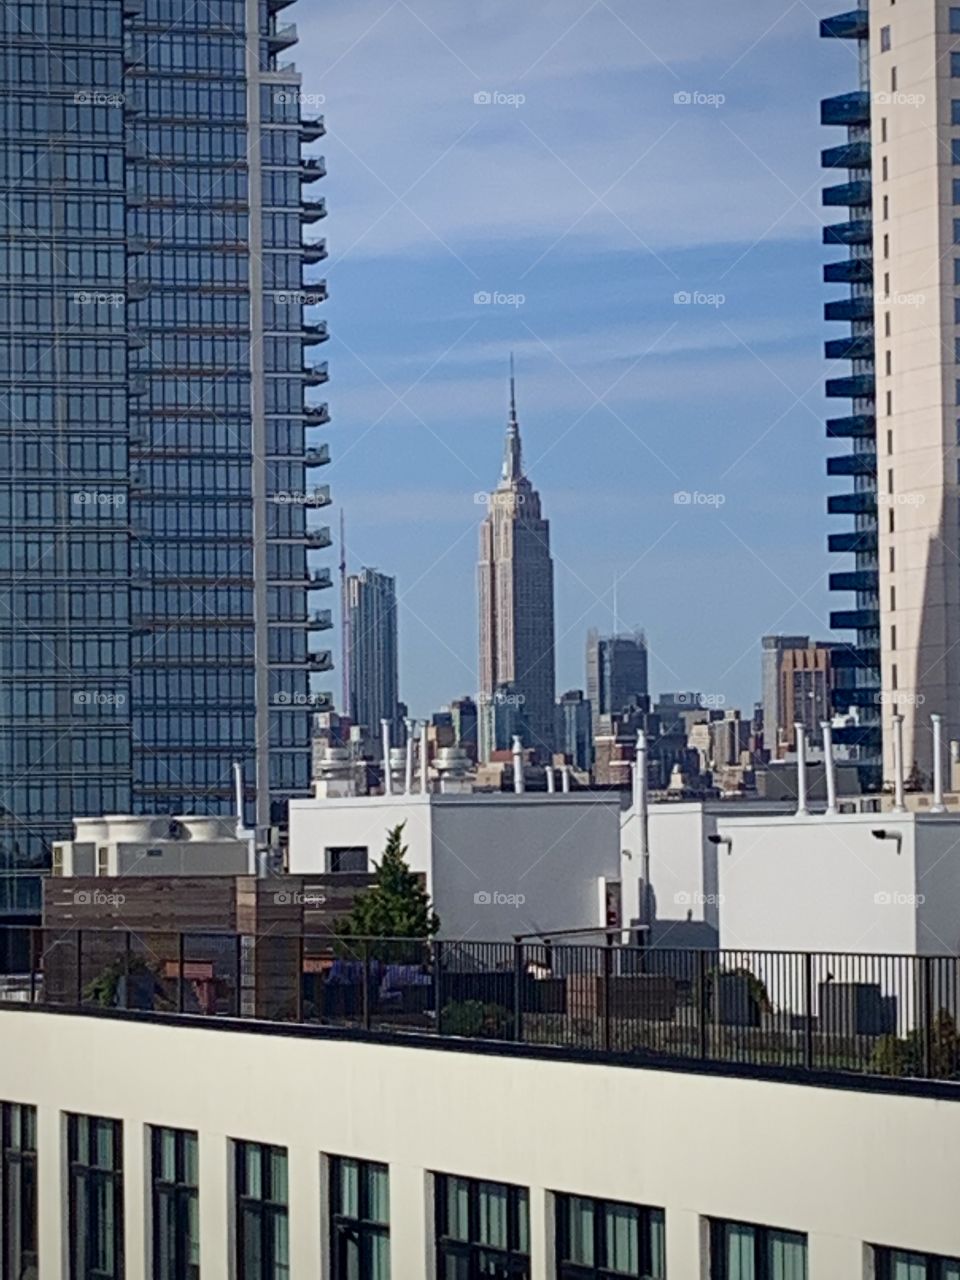 Empire State Building seen from Brooklyn rooftop